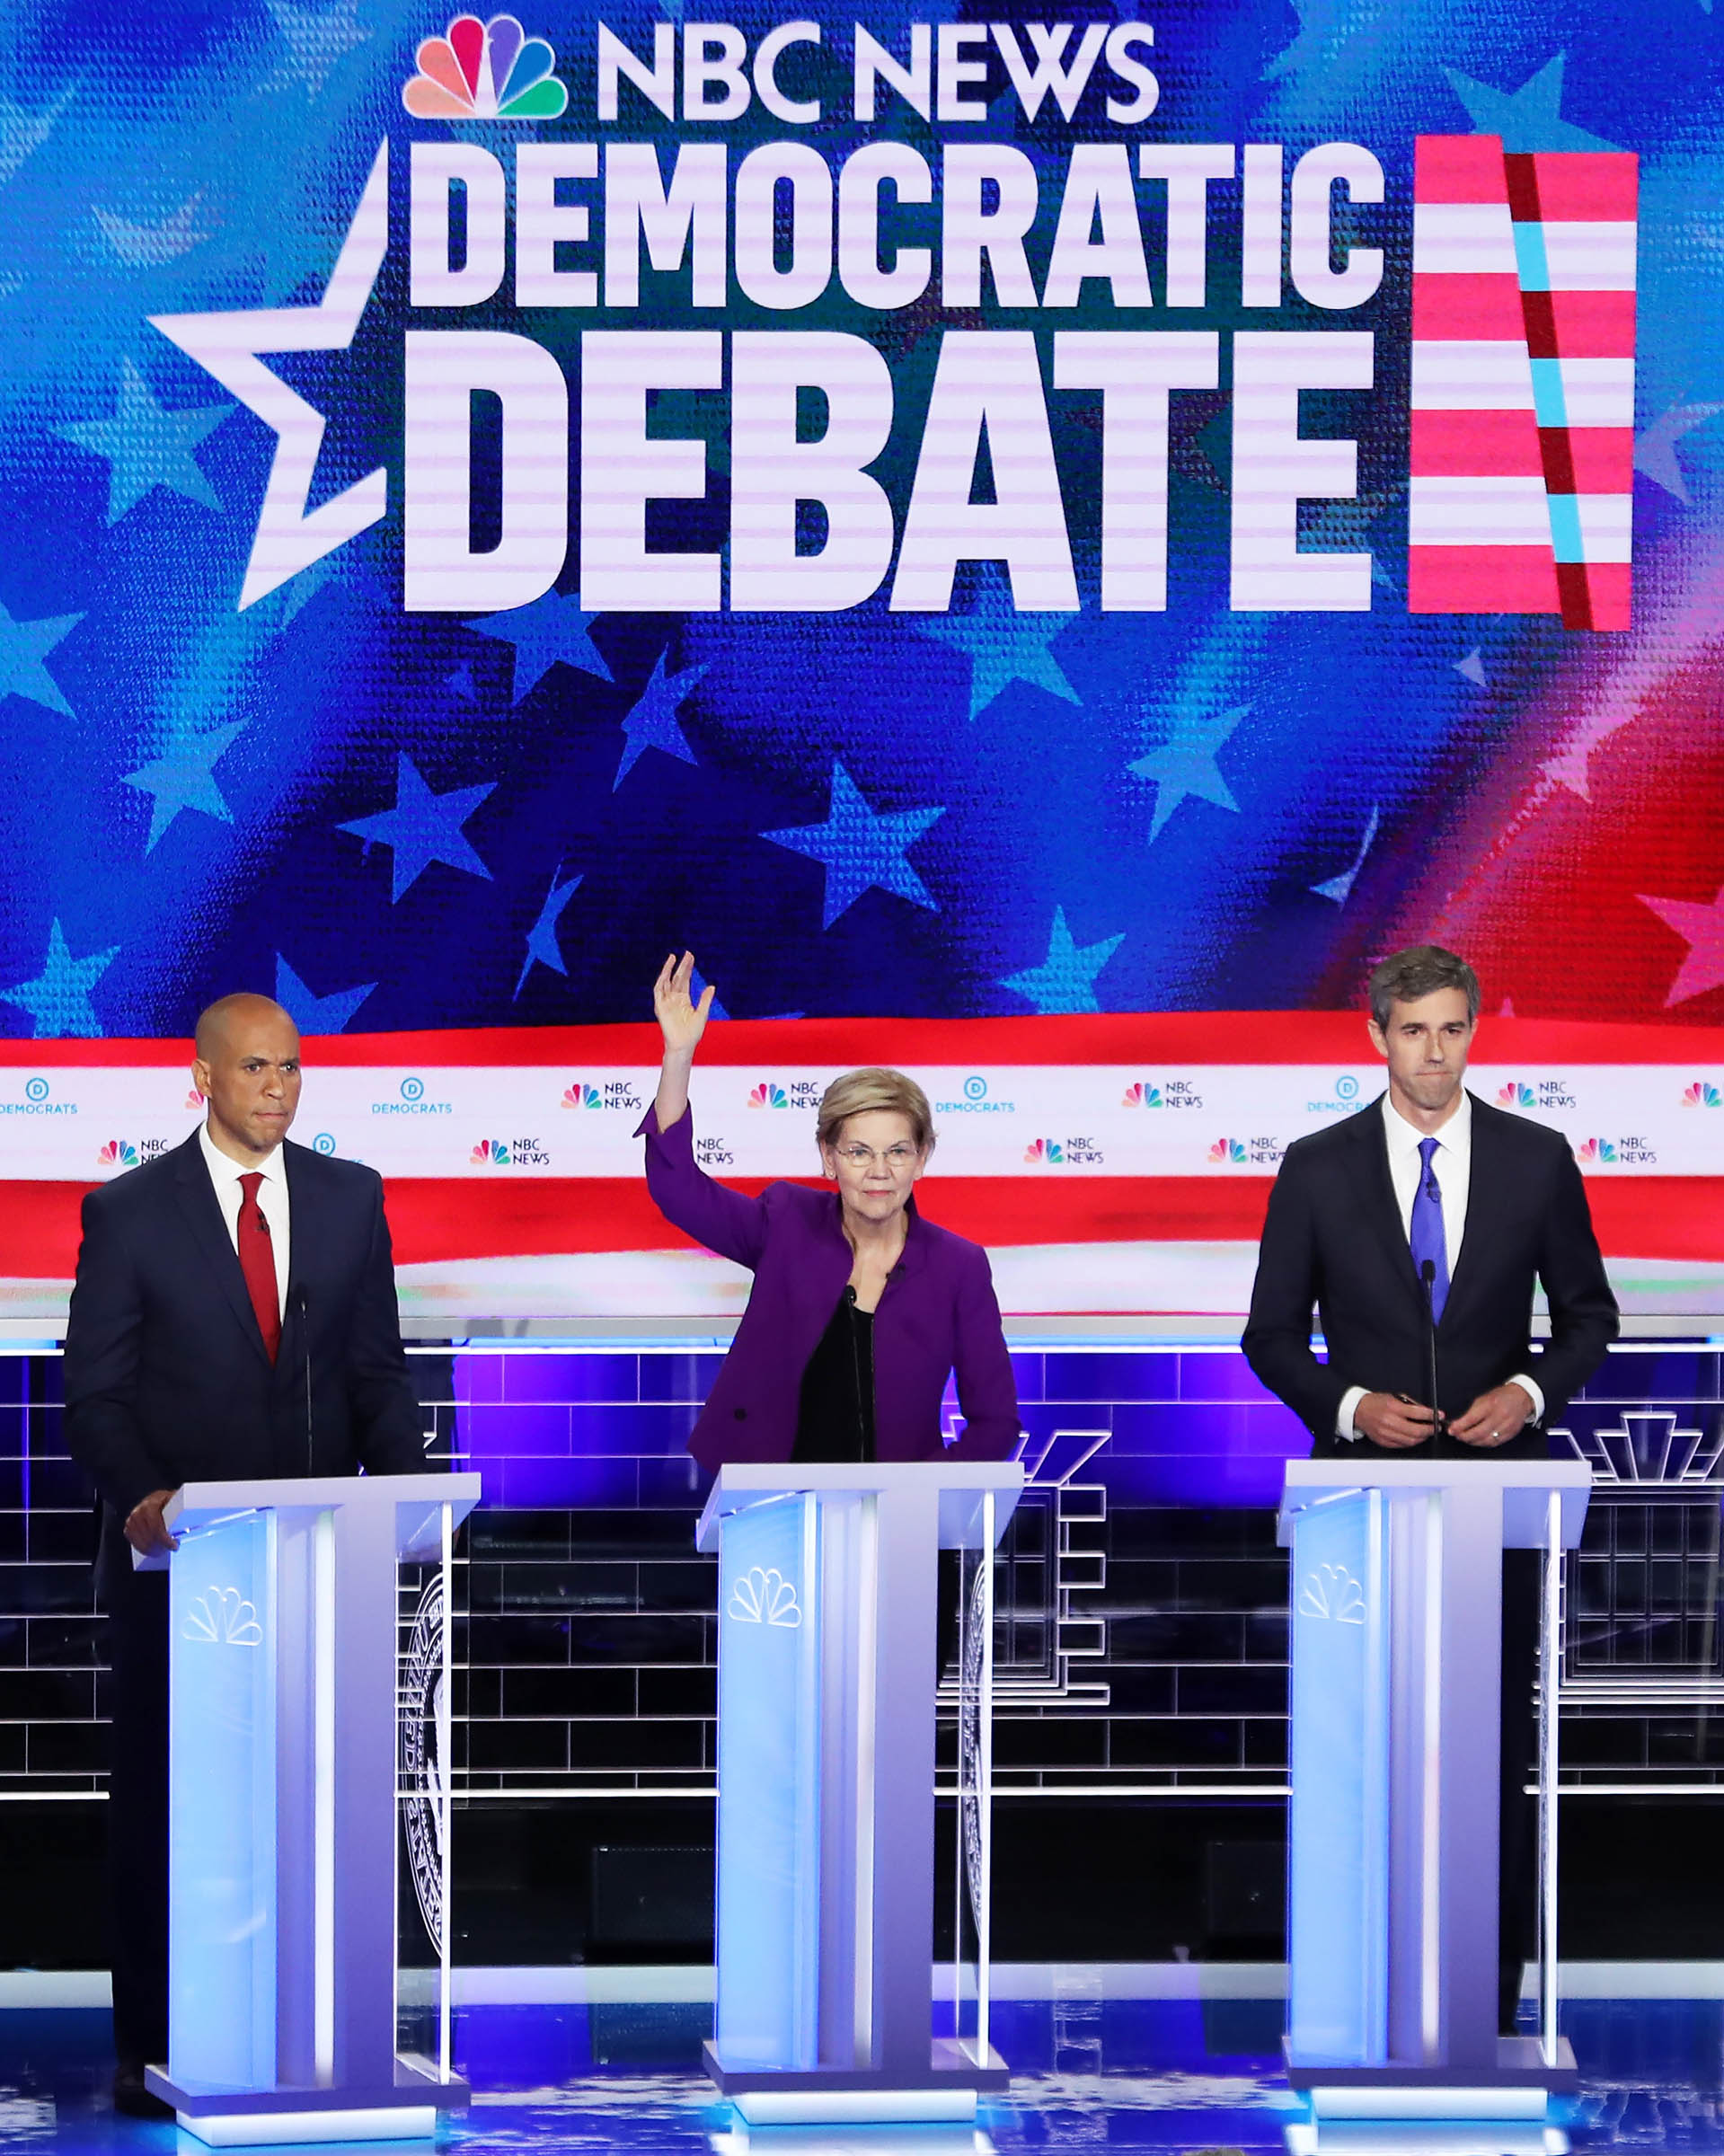 (L-R) Sen. Cory Booker (D-NJ), Sen. Elizabeth Warren (D-MA) and former Texas congressman Beto O'Rourke take part in the first night of the Democratic presidential debate on June 26, 2019 in Miami, Florida. (Joe Raedle—Getty Images)